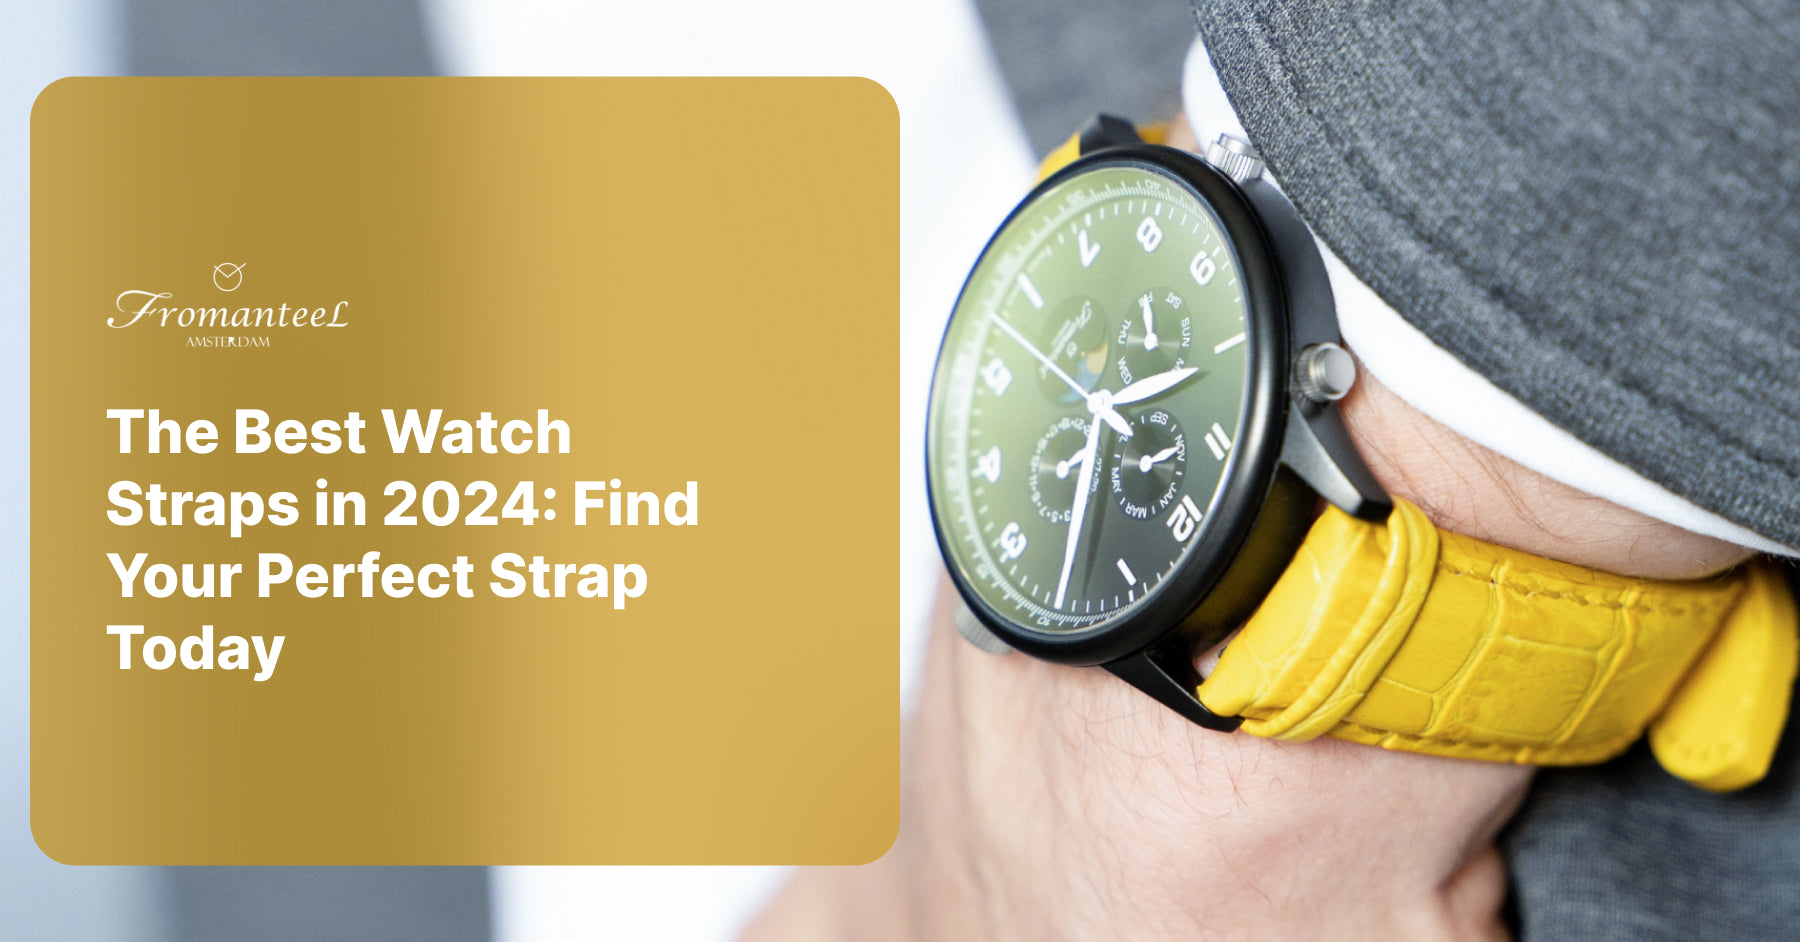 The Best Watch Straps in 2024: Find Your Perfect Strap Today